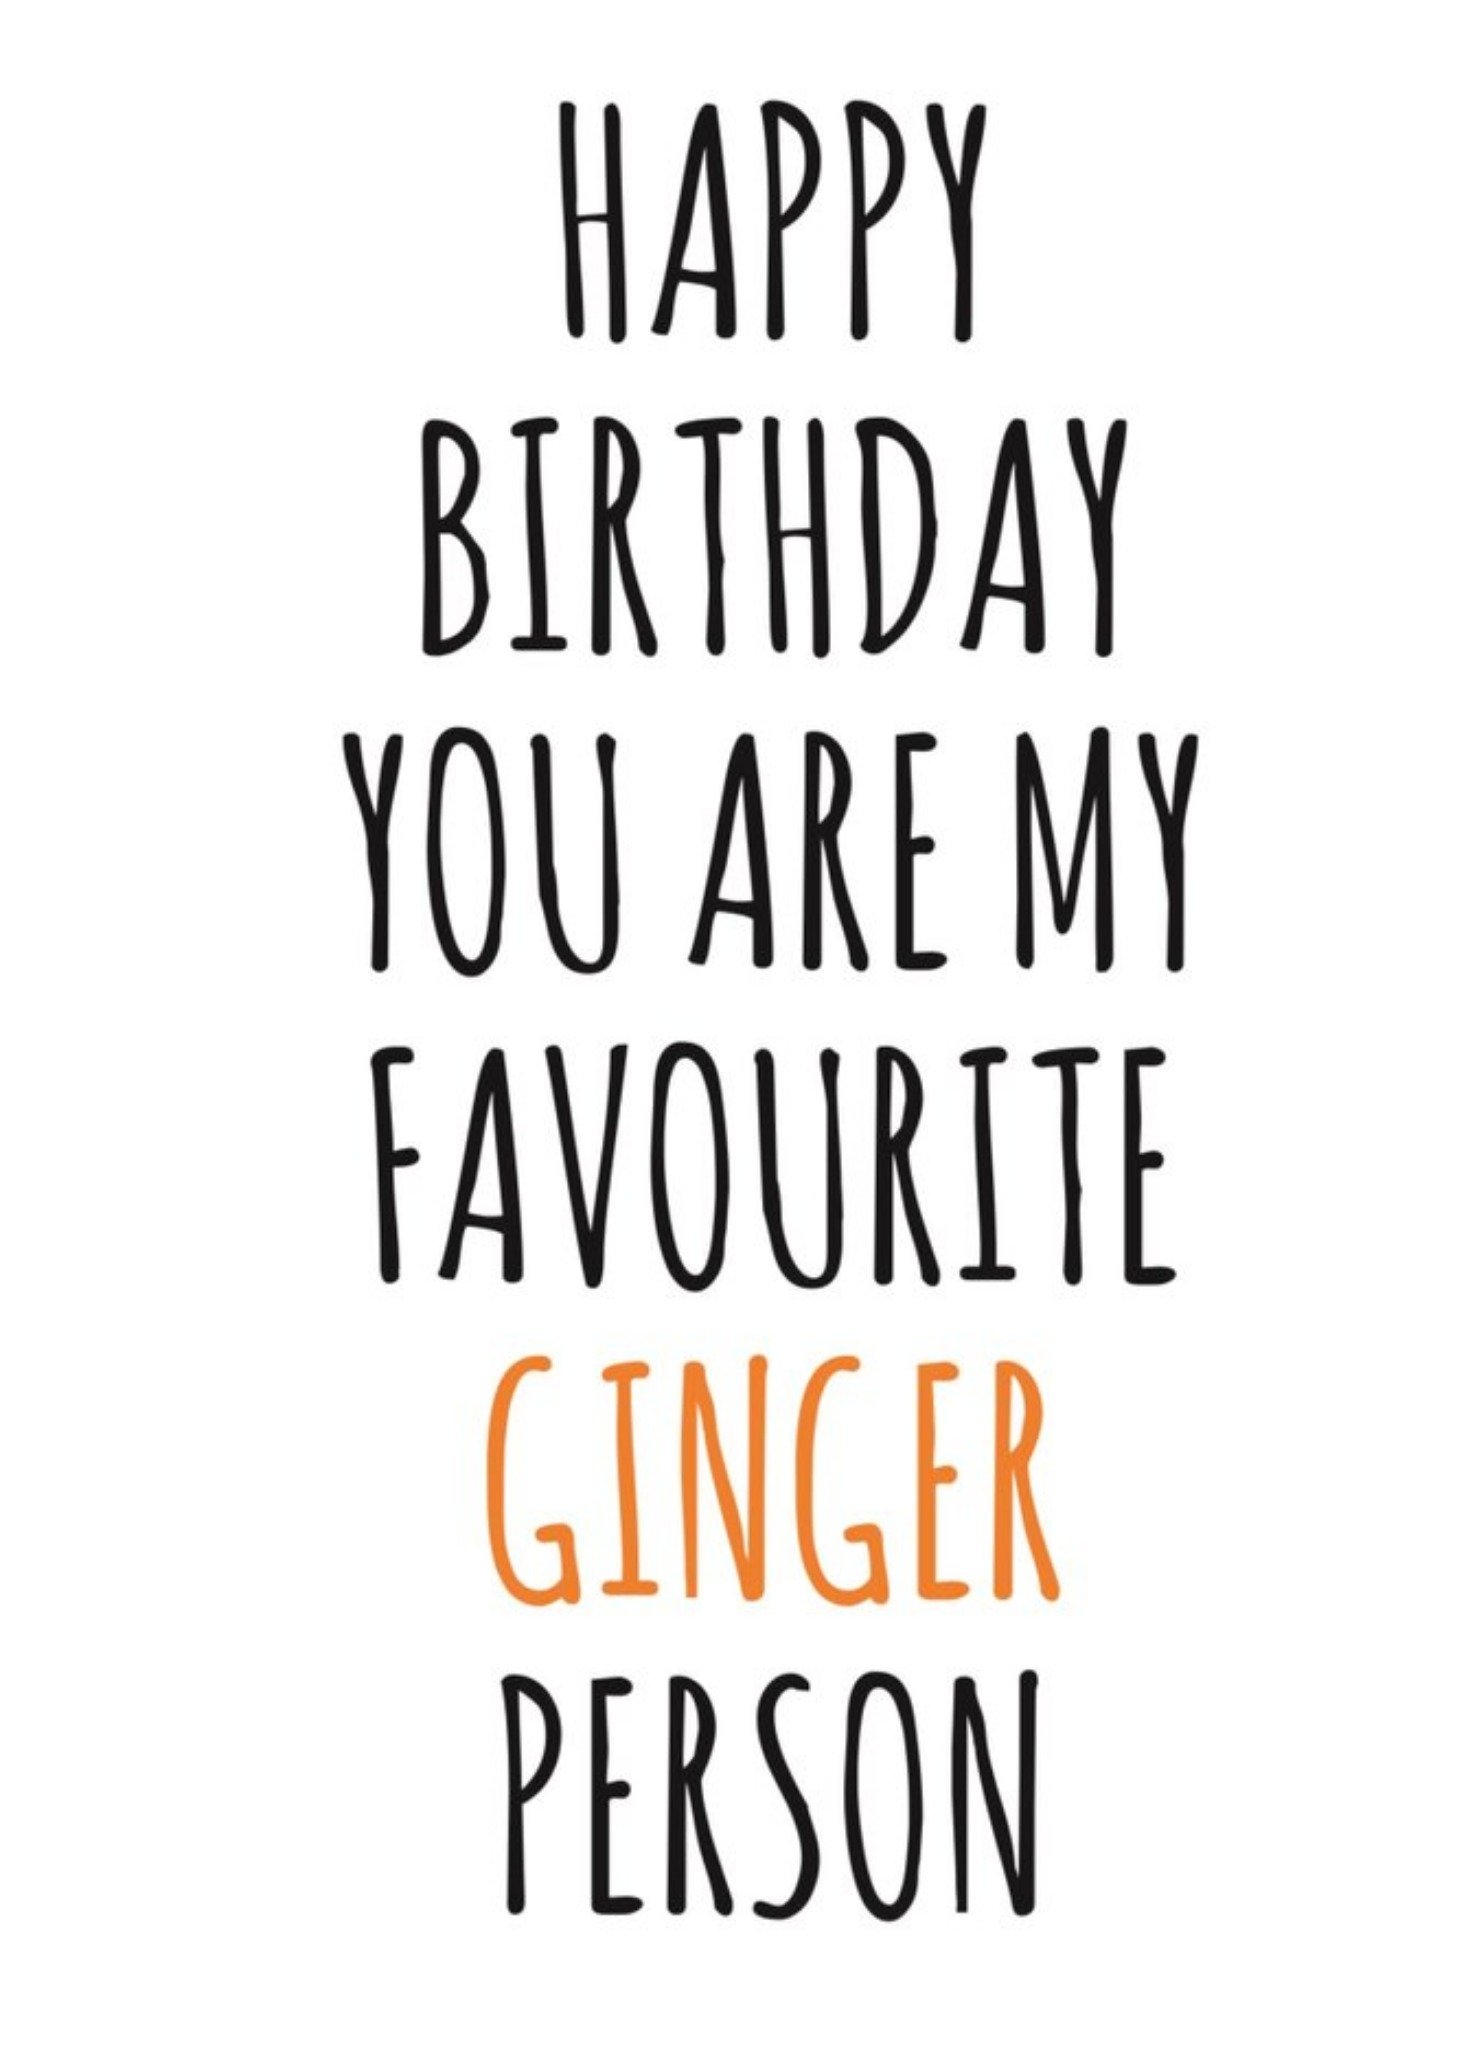 Banter King Typographical You Are My Favourite Ginger Person Happy Birthday Card Ecard